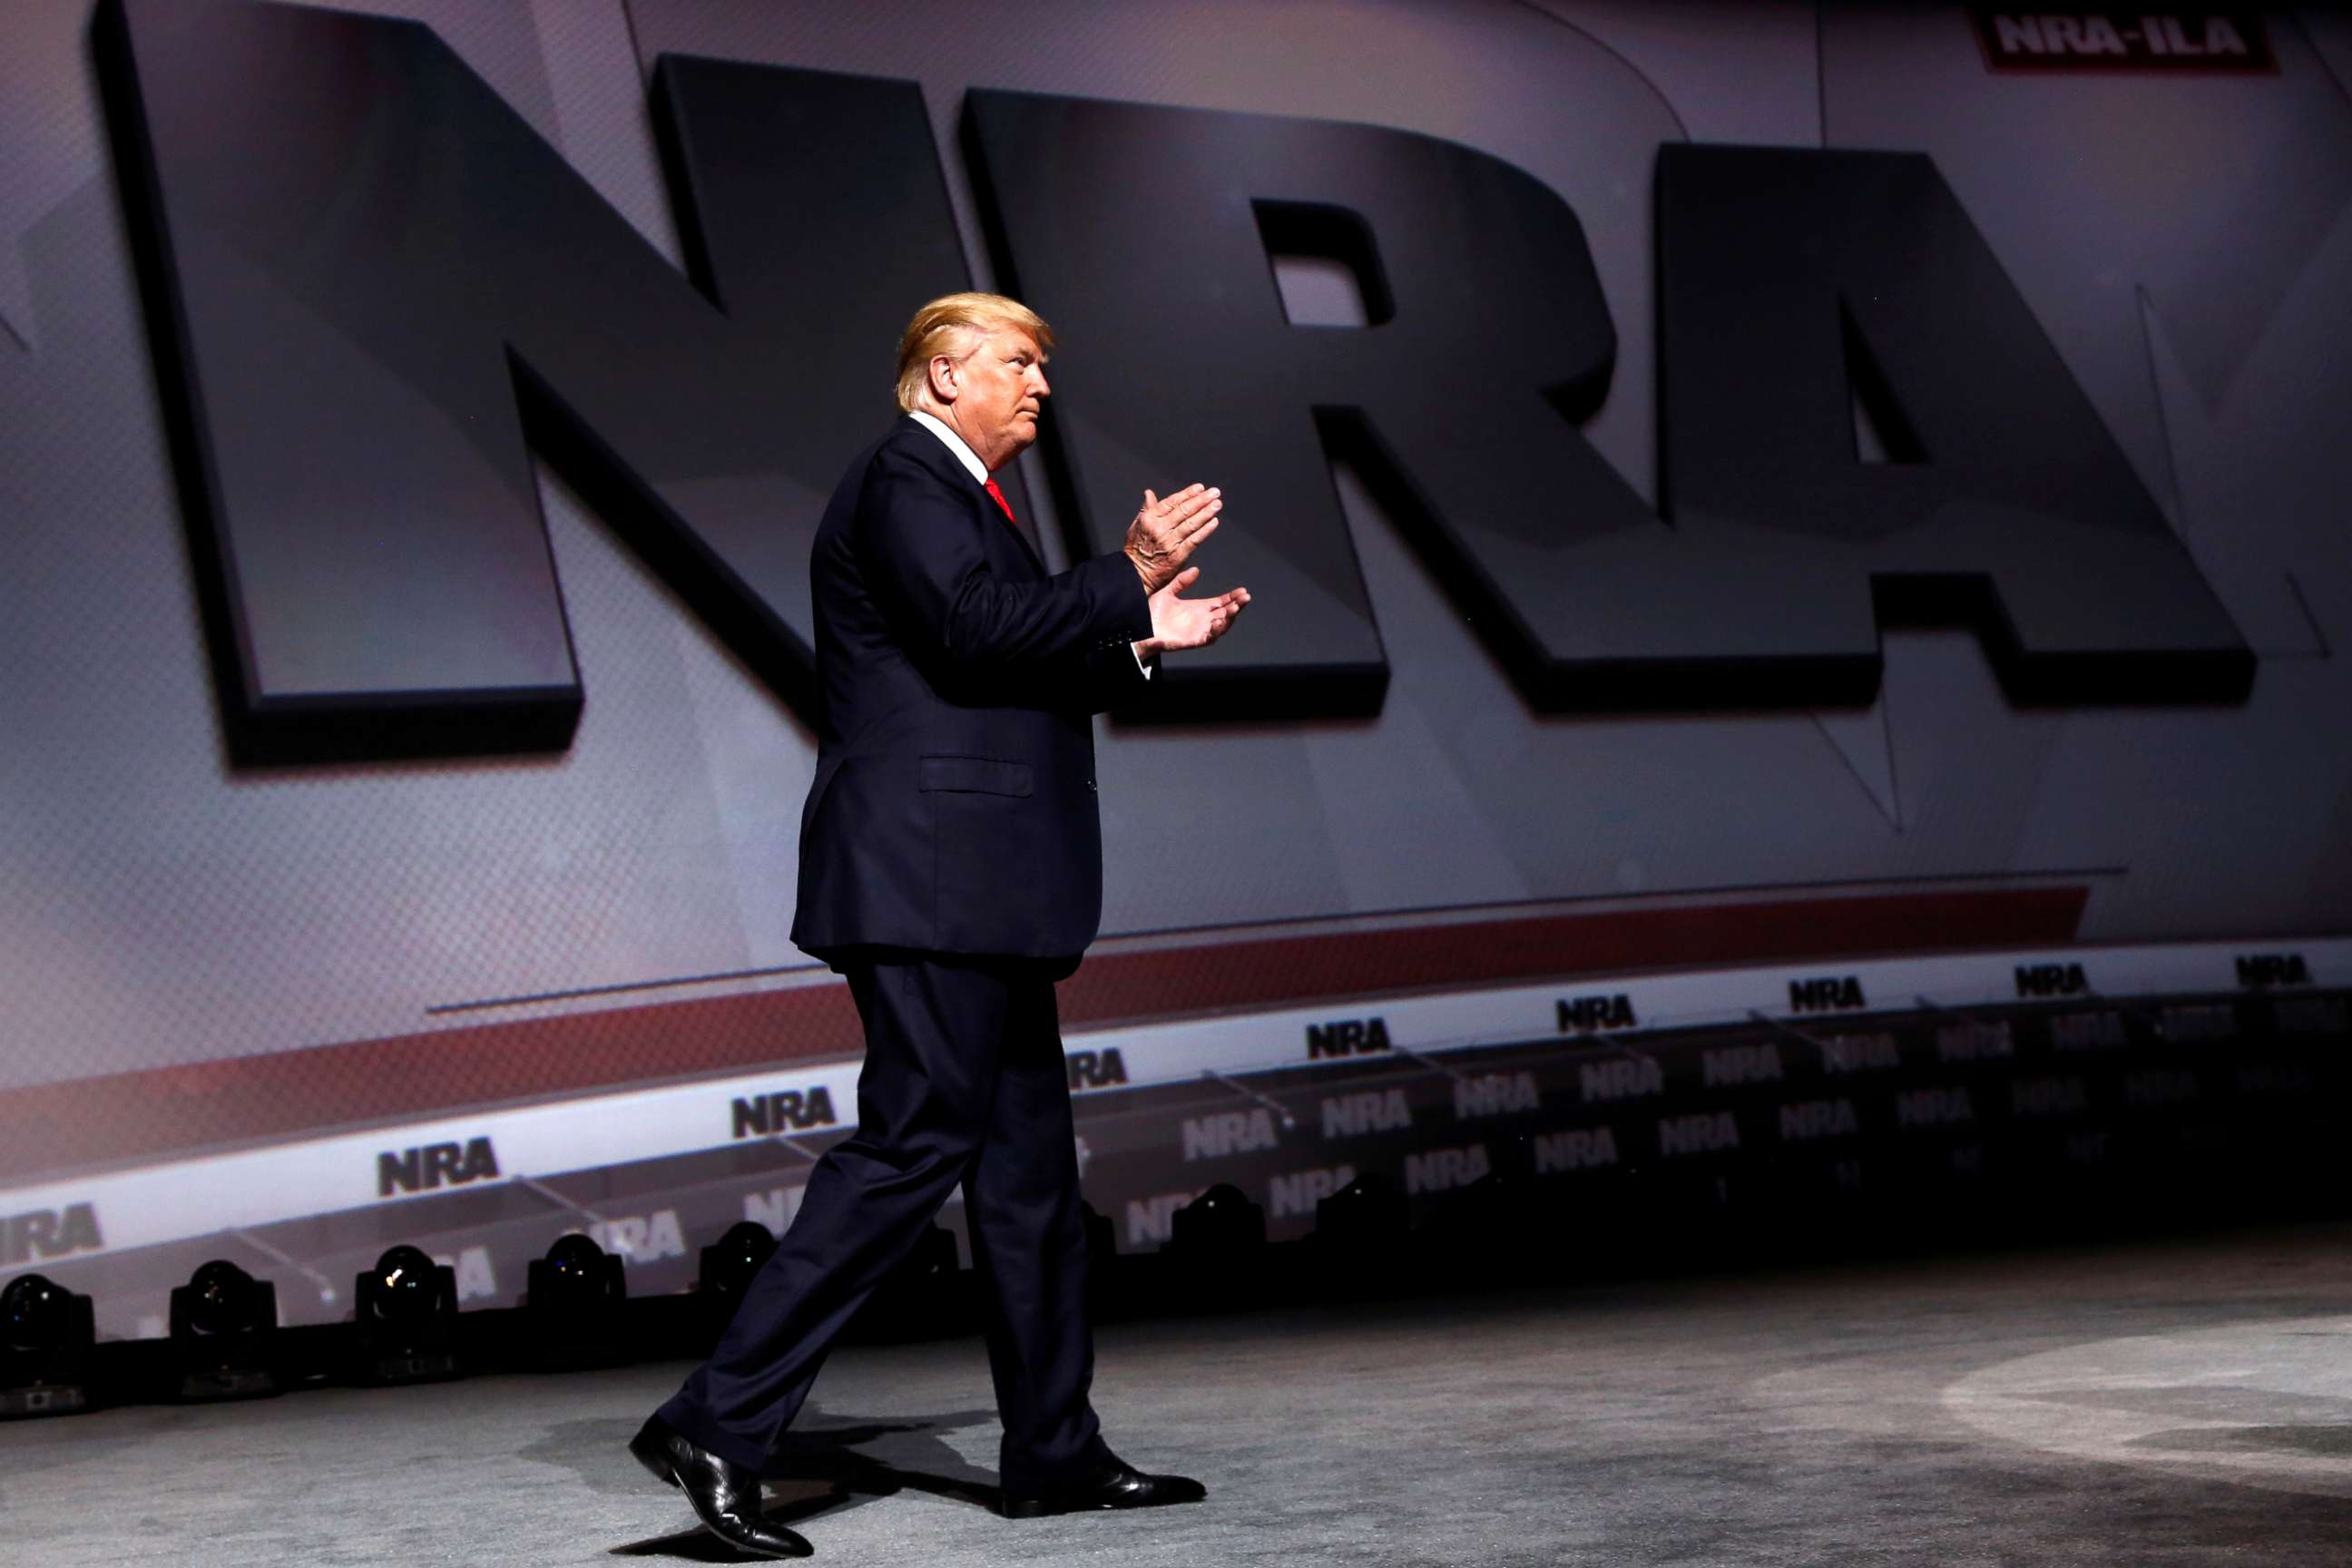 PHOTO: President Donald Trump arrives onstage to deliver remarks at the National Rifle Association Leadership Forum at the Georgia World Congress Center in Atlanta, April 28, 2017.